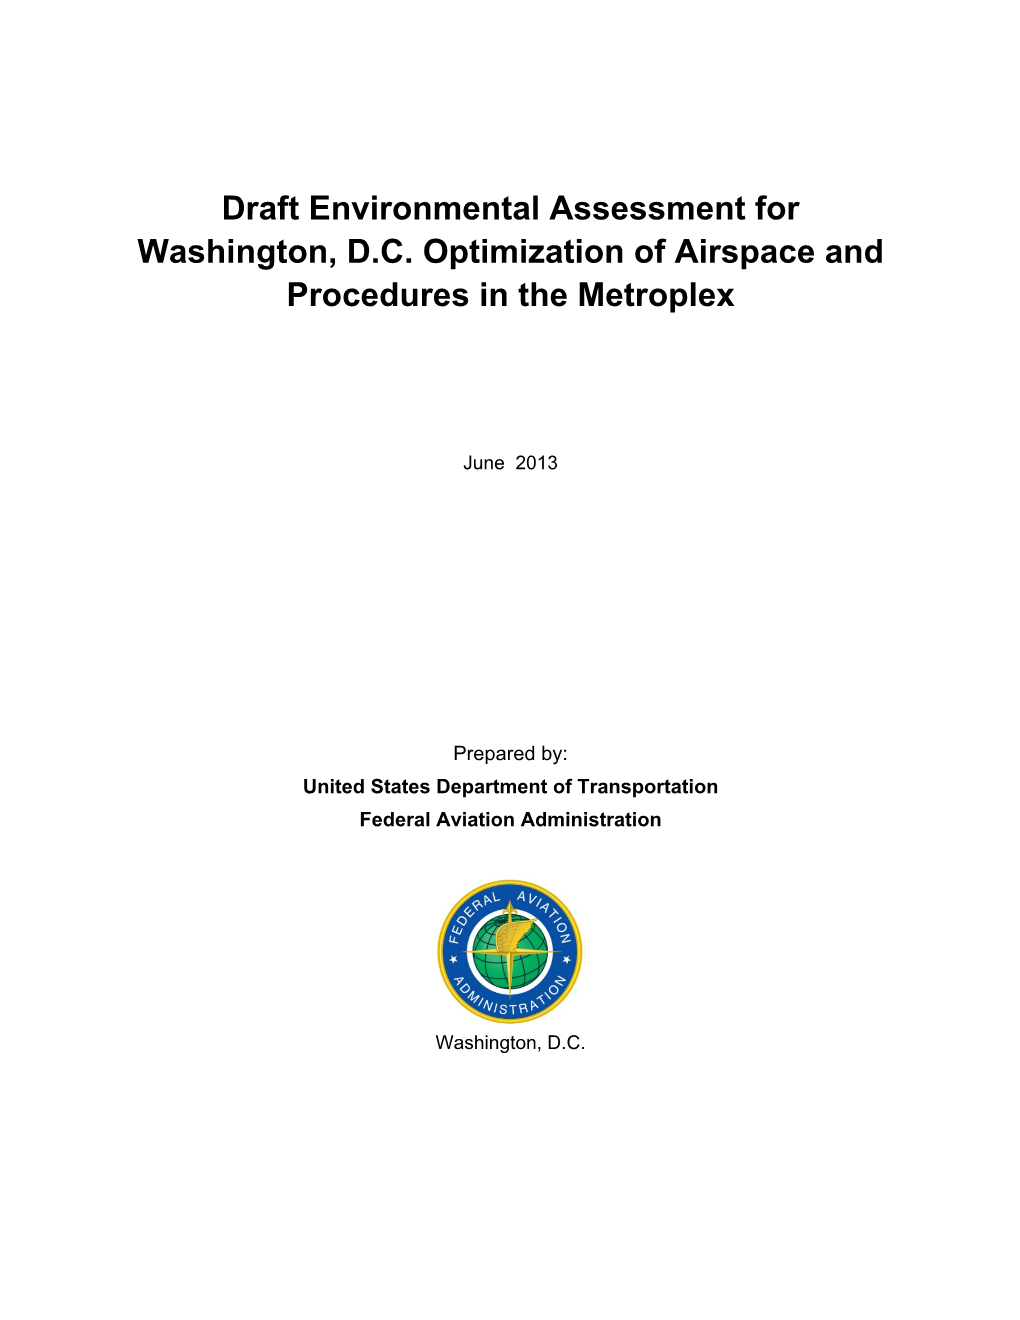 Draft Environmental Assessment for Washington, D.C. Optimization of Airspace and Procedures in the Metroplex